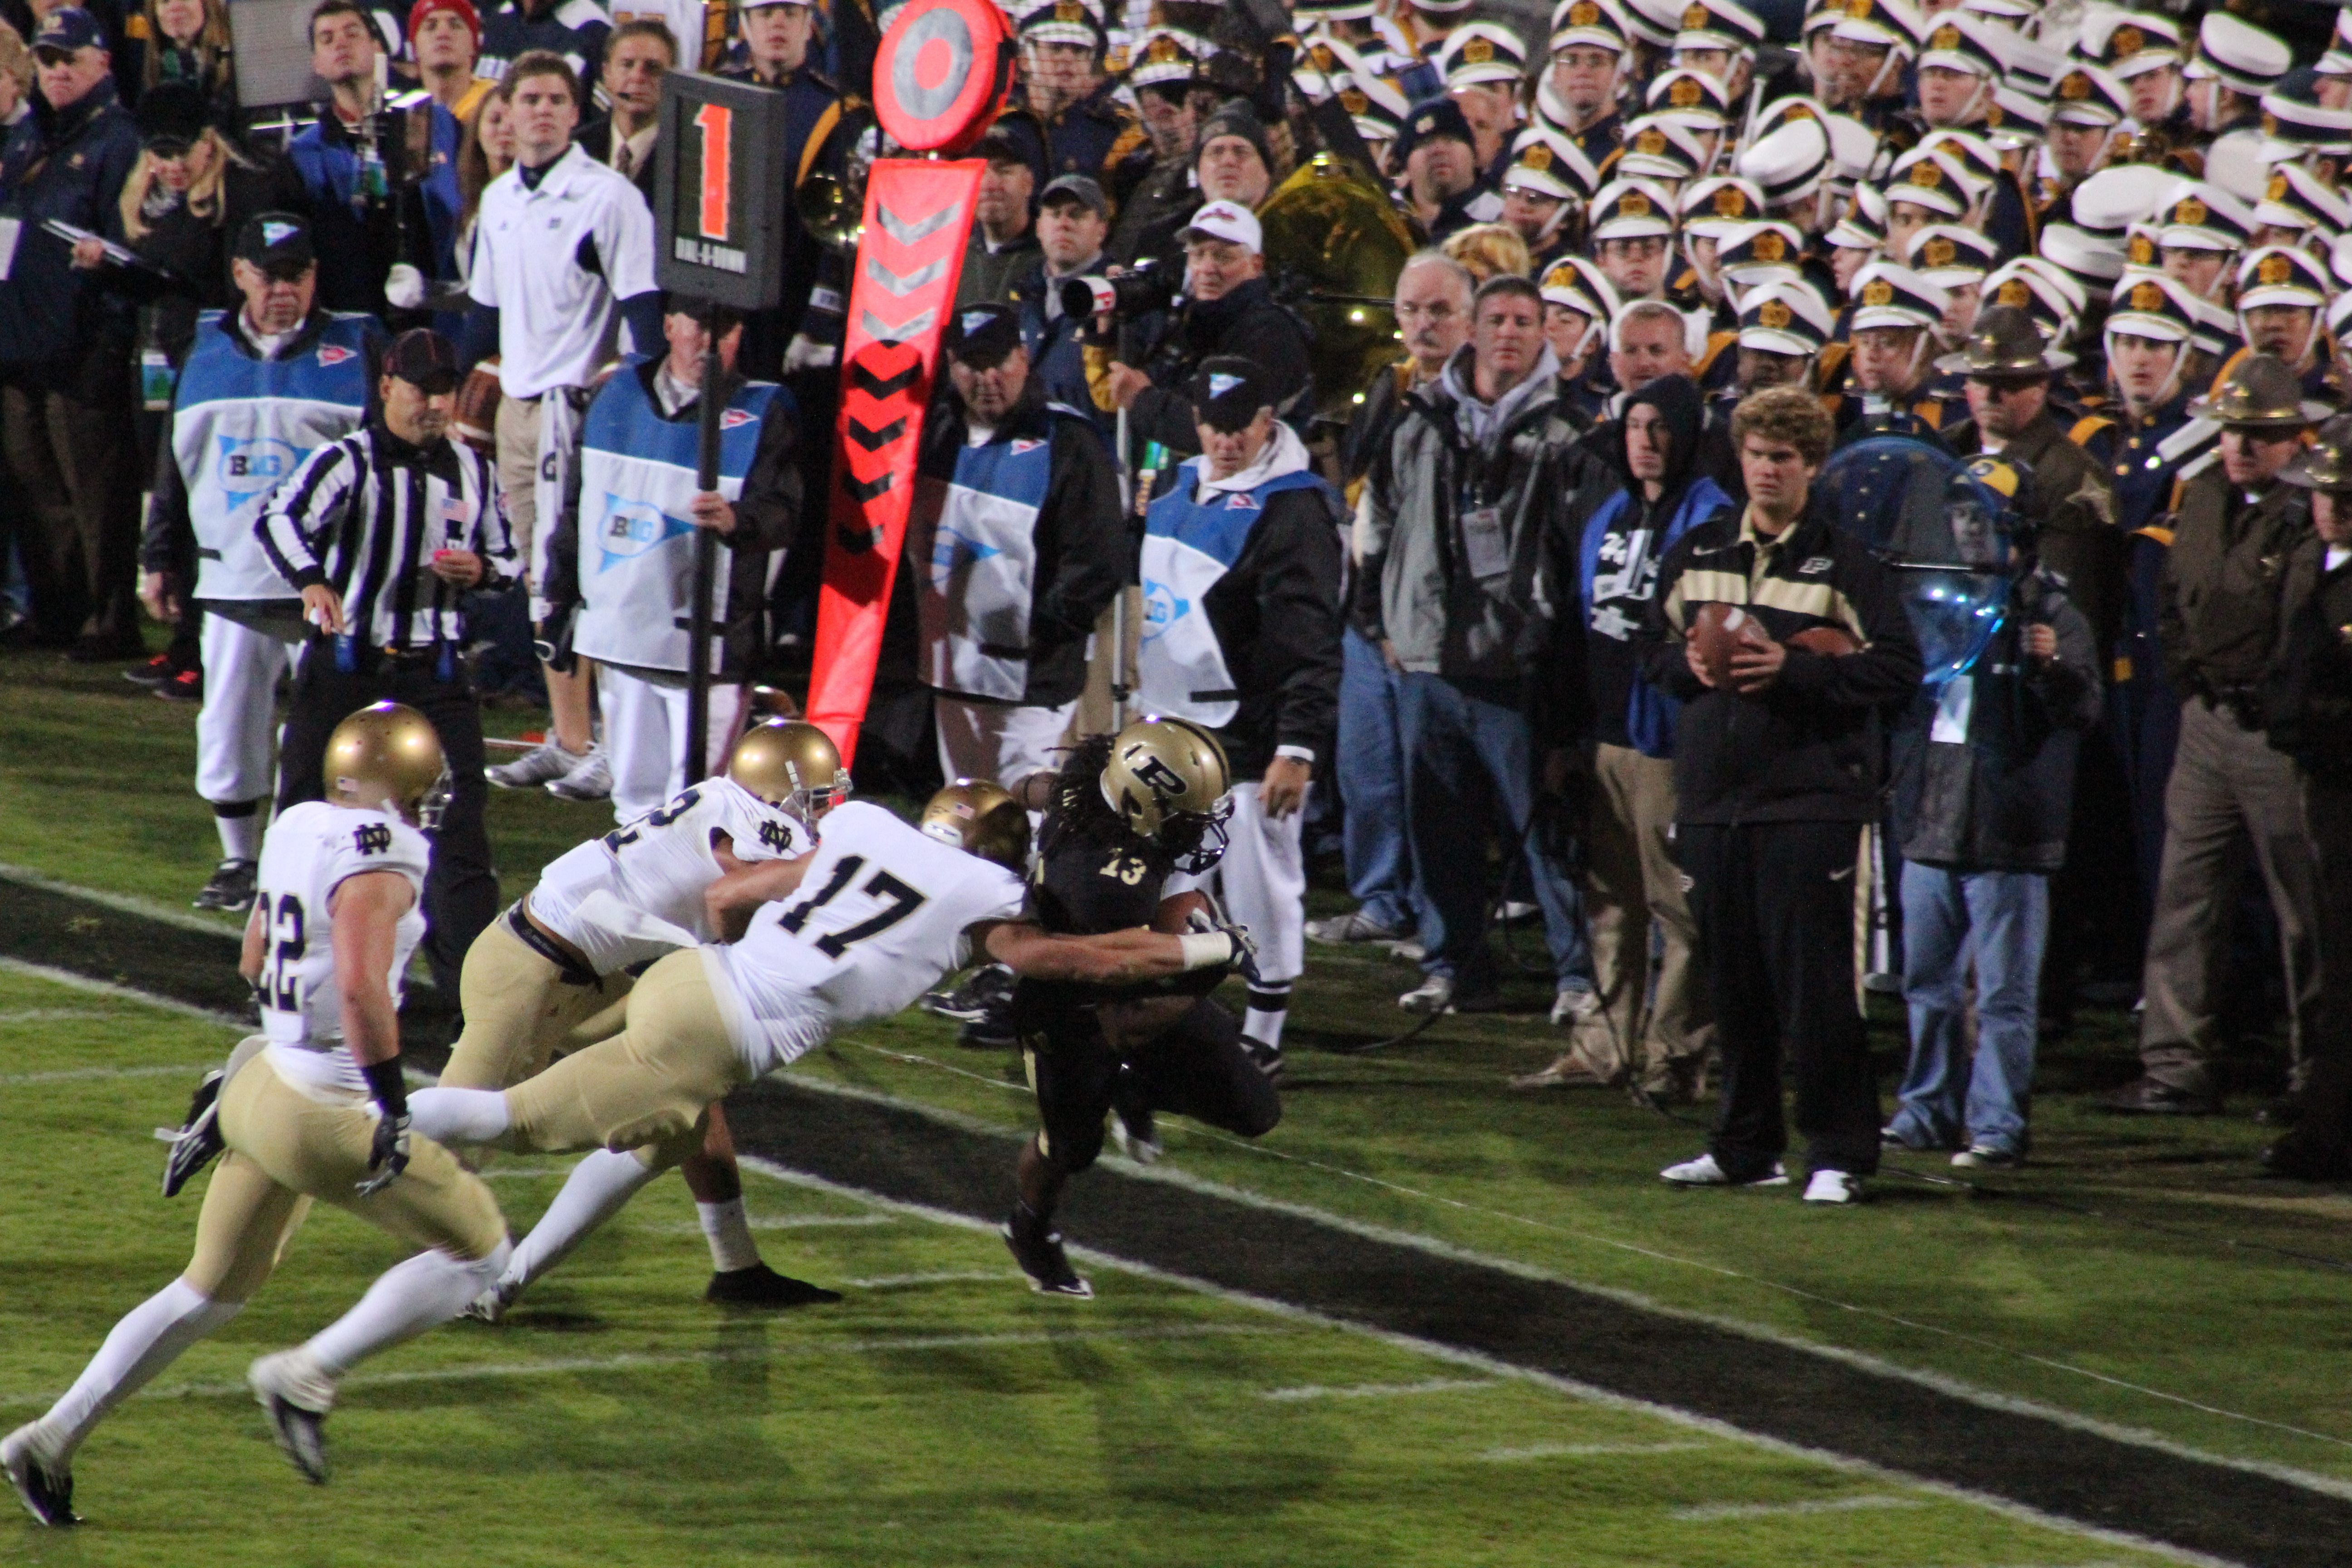 Purdue vs. Notre Dame Photo Gallery | Confessions of a Sports Junkie5184 x 3456